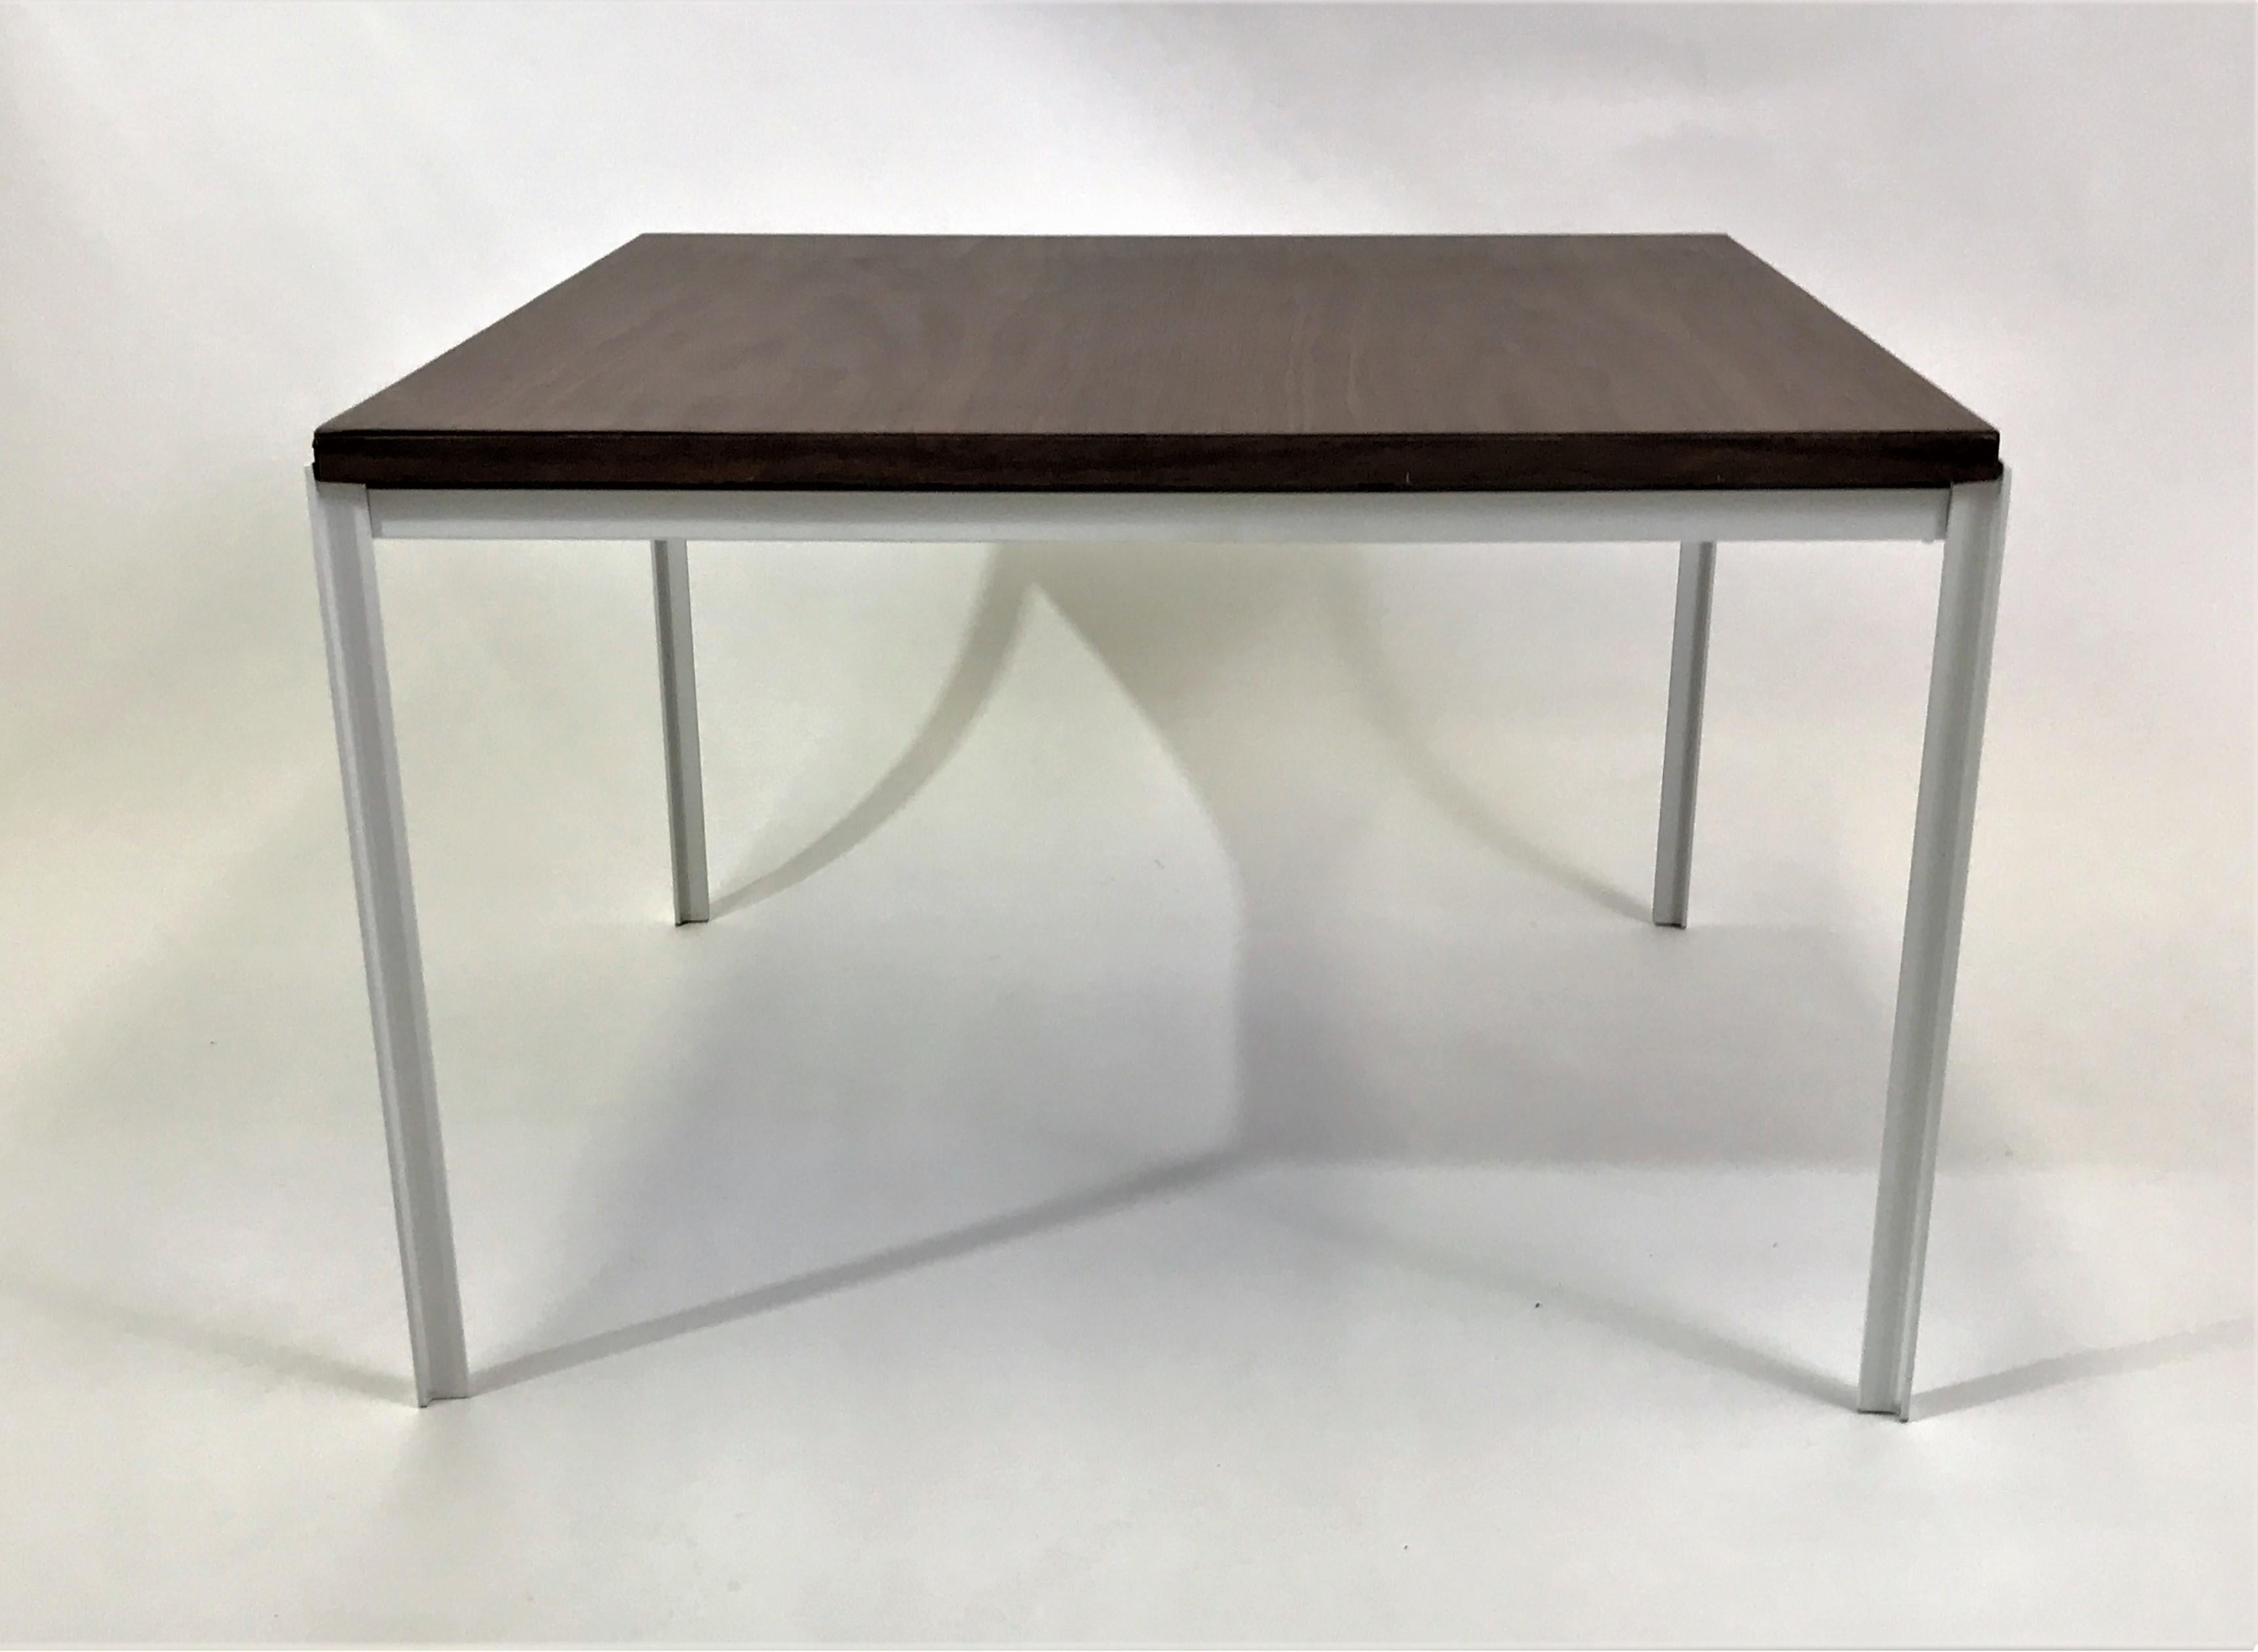 Designed by Florence Knoll in the 1950s, this T angle table with a walnut grain laminate top and white iron base. In very good condition, the base re-patinated and the laminate top in very good vintage condition showing little signs of use. For use